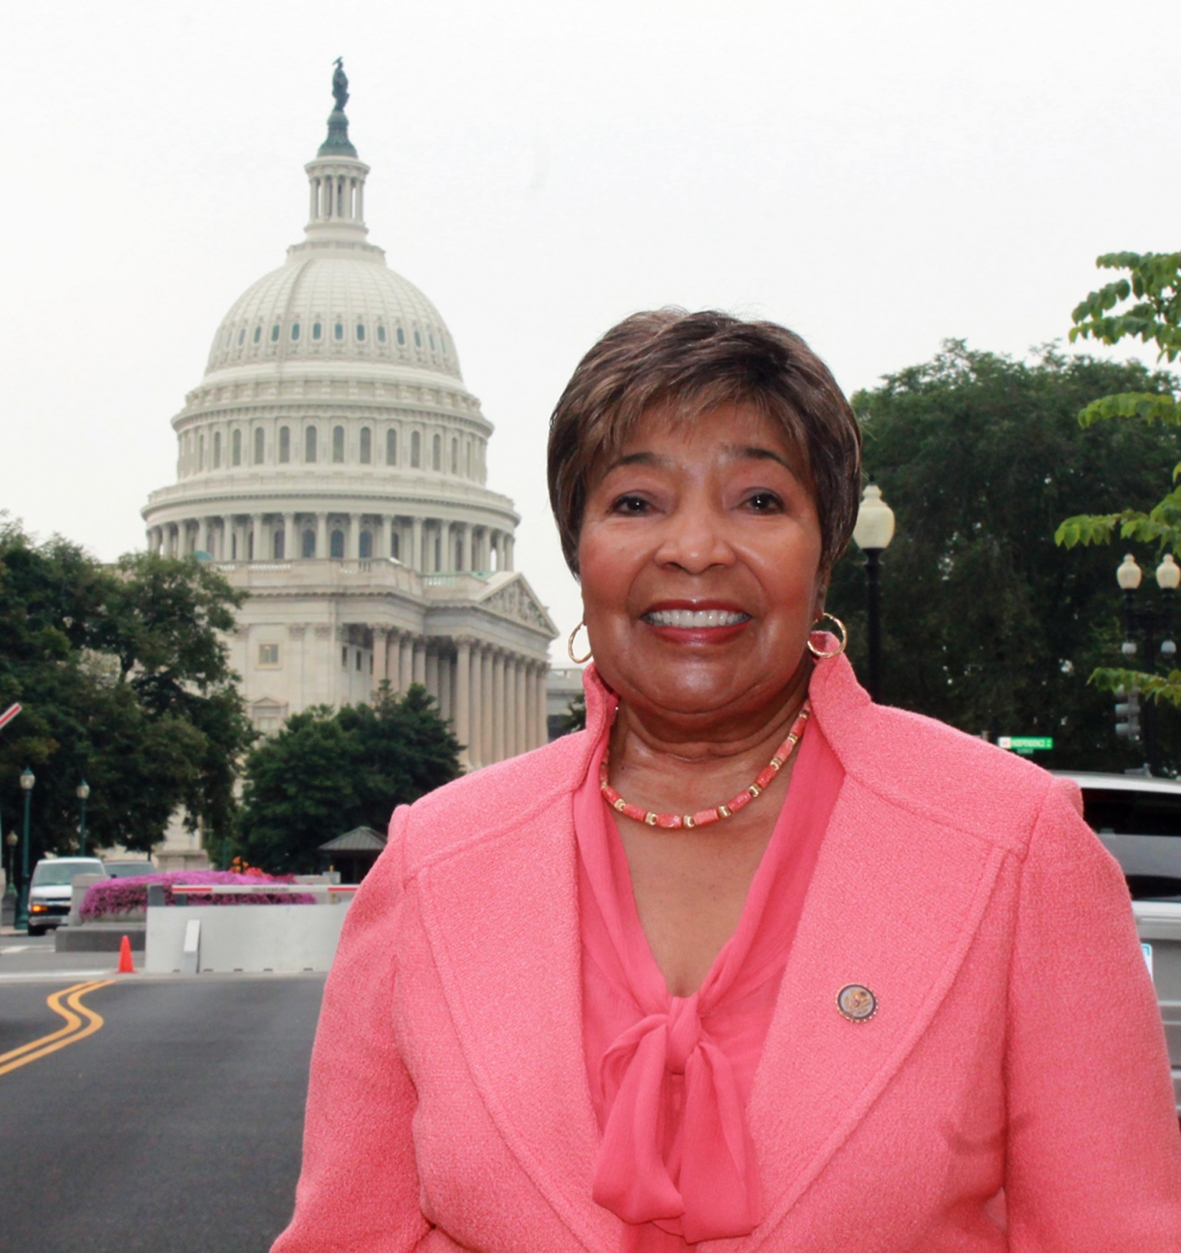 Congresswoman Johnson Introduces Resolution Honoring the Joint Center for Political and Economic Studies